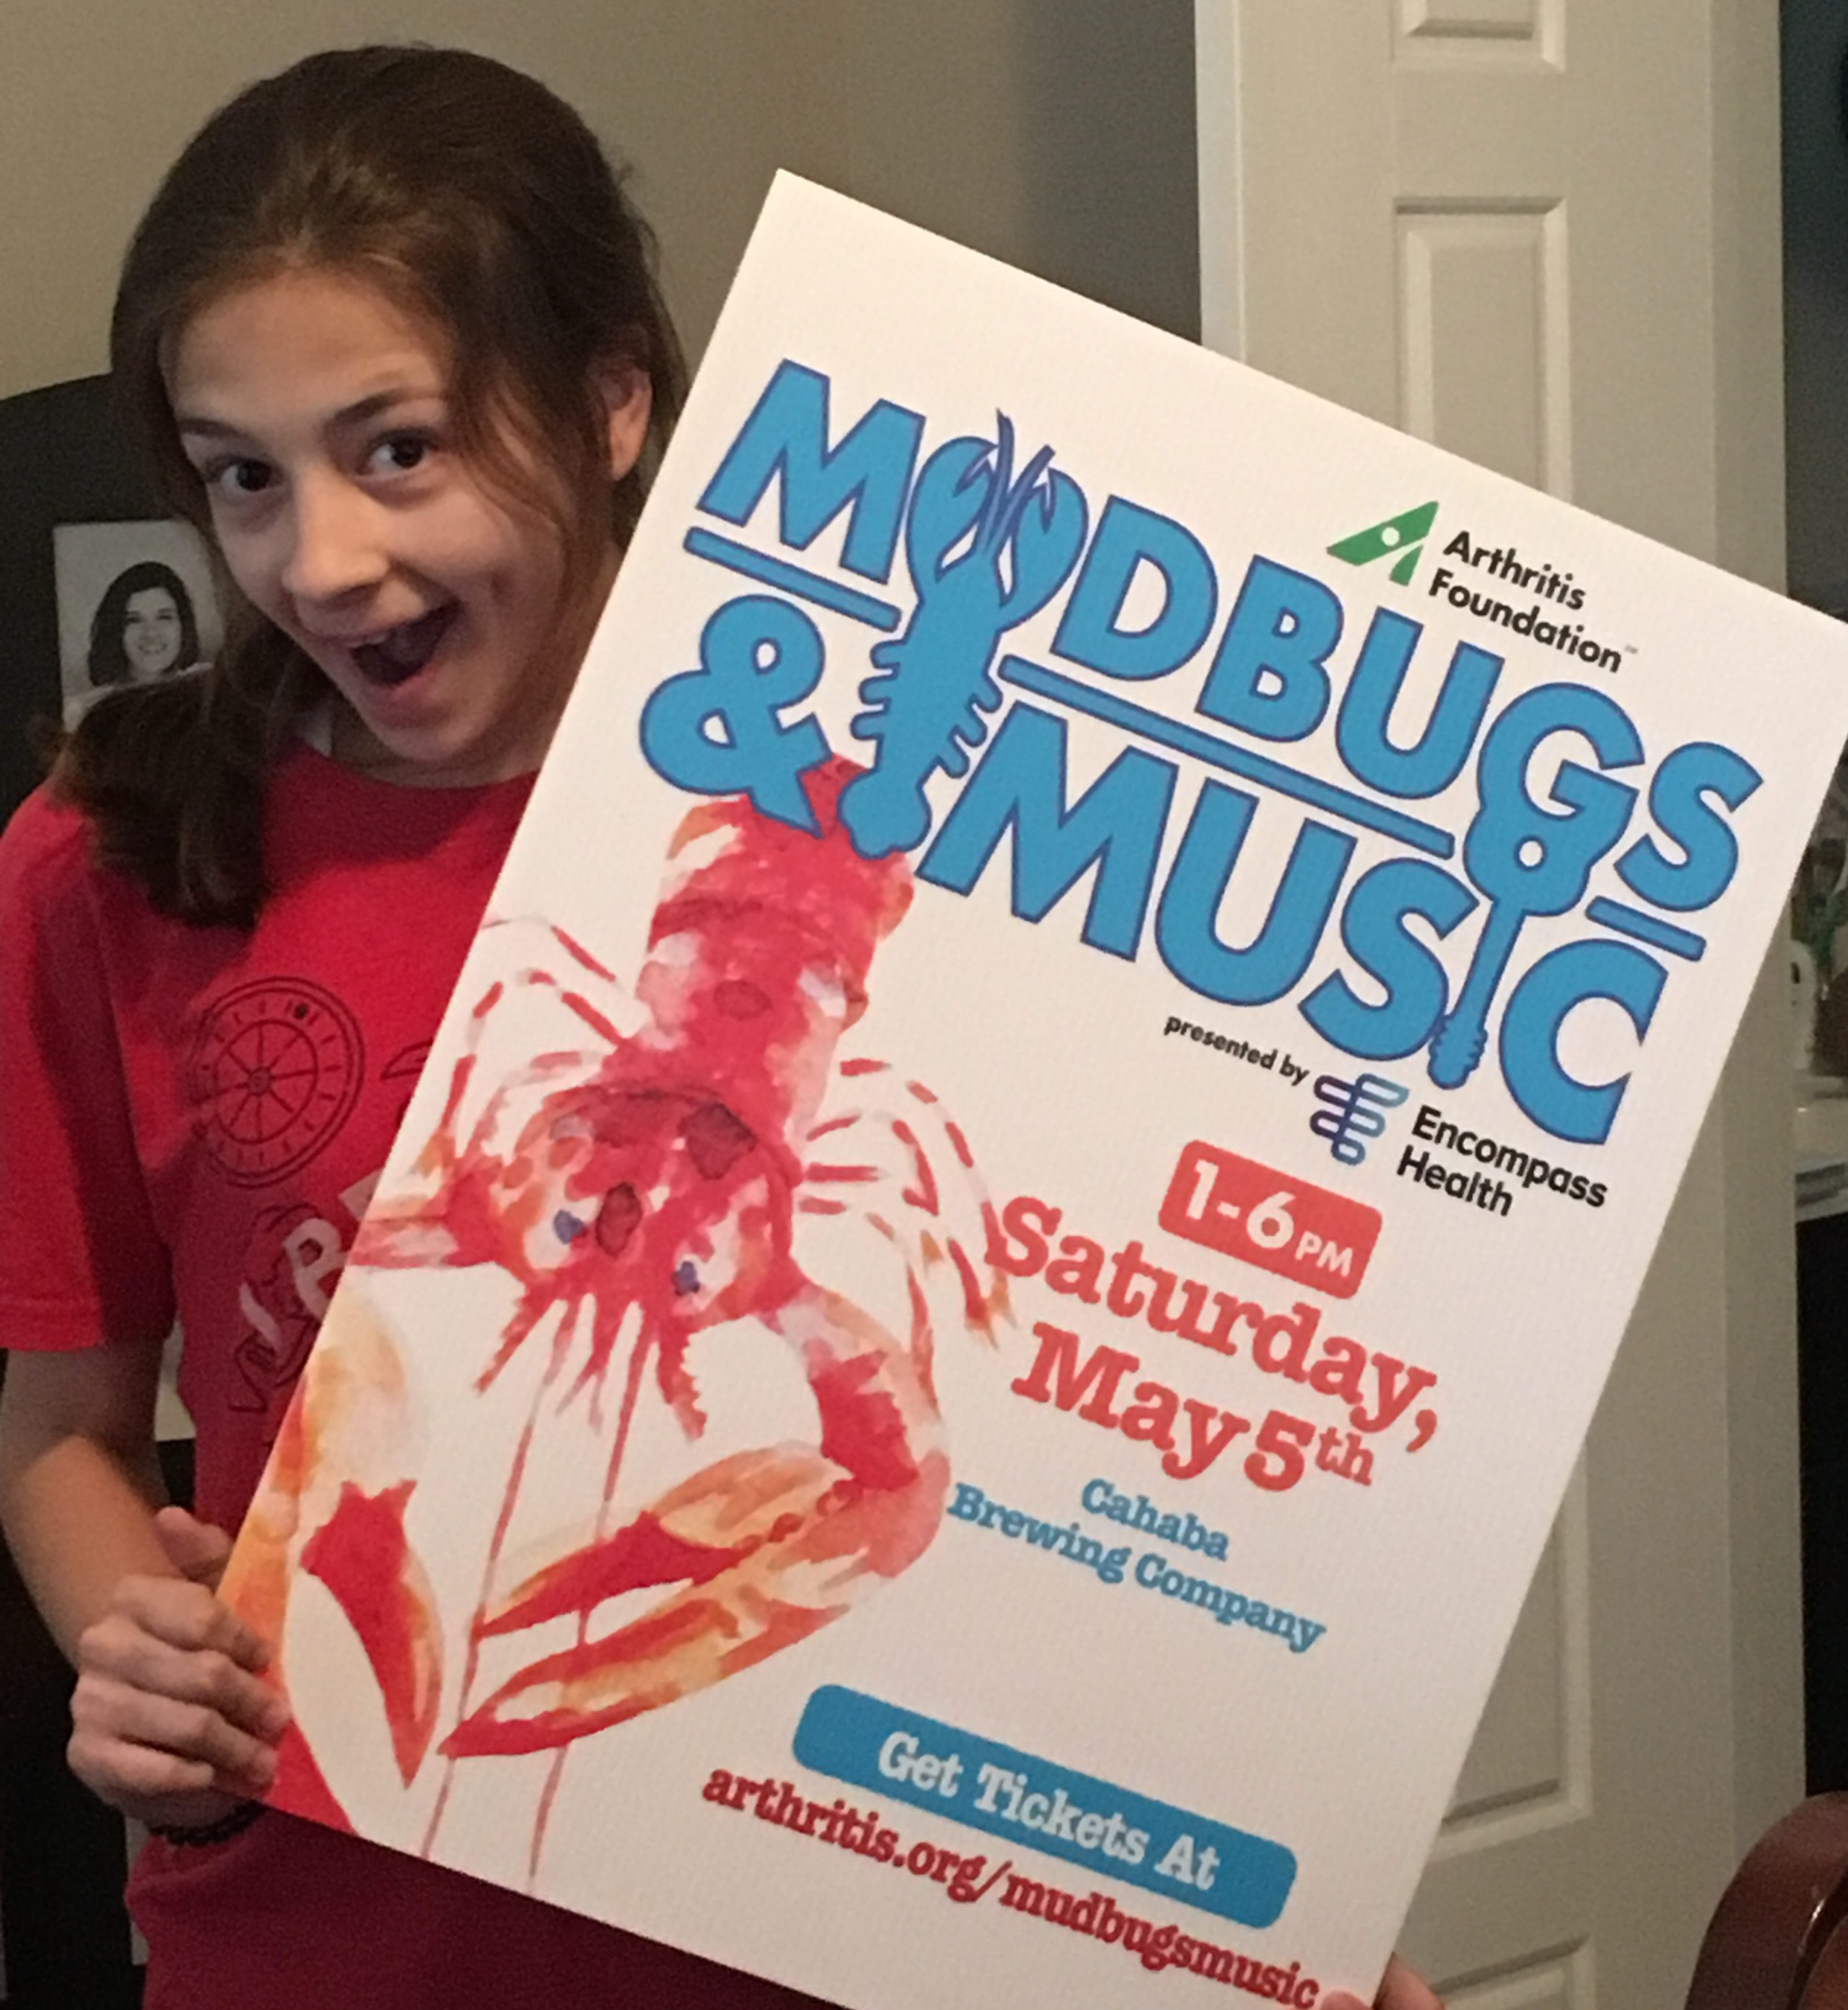 Trussville youth named honoree for annual Mudbugs & Music fundraising event for Juvenile Arthritis